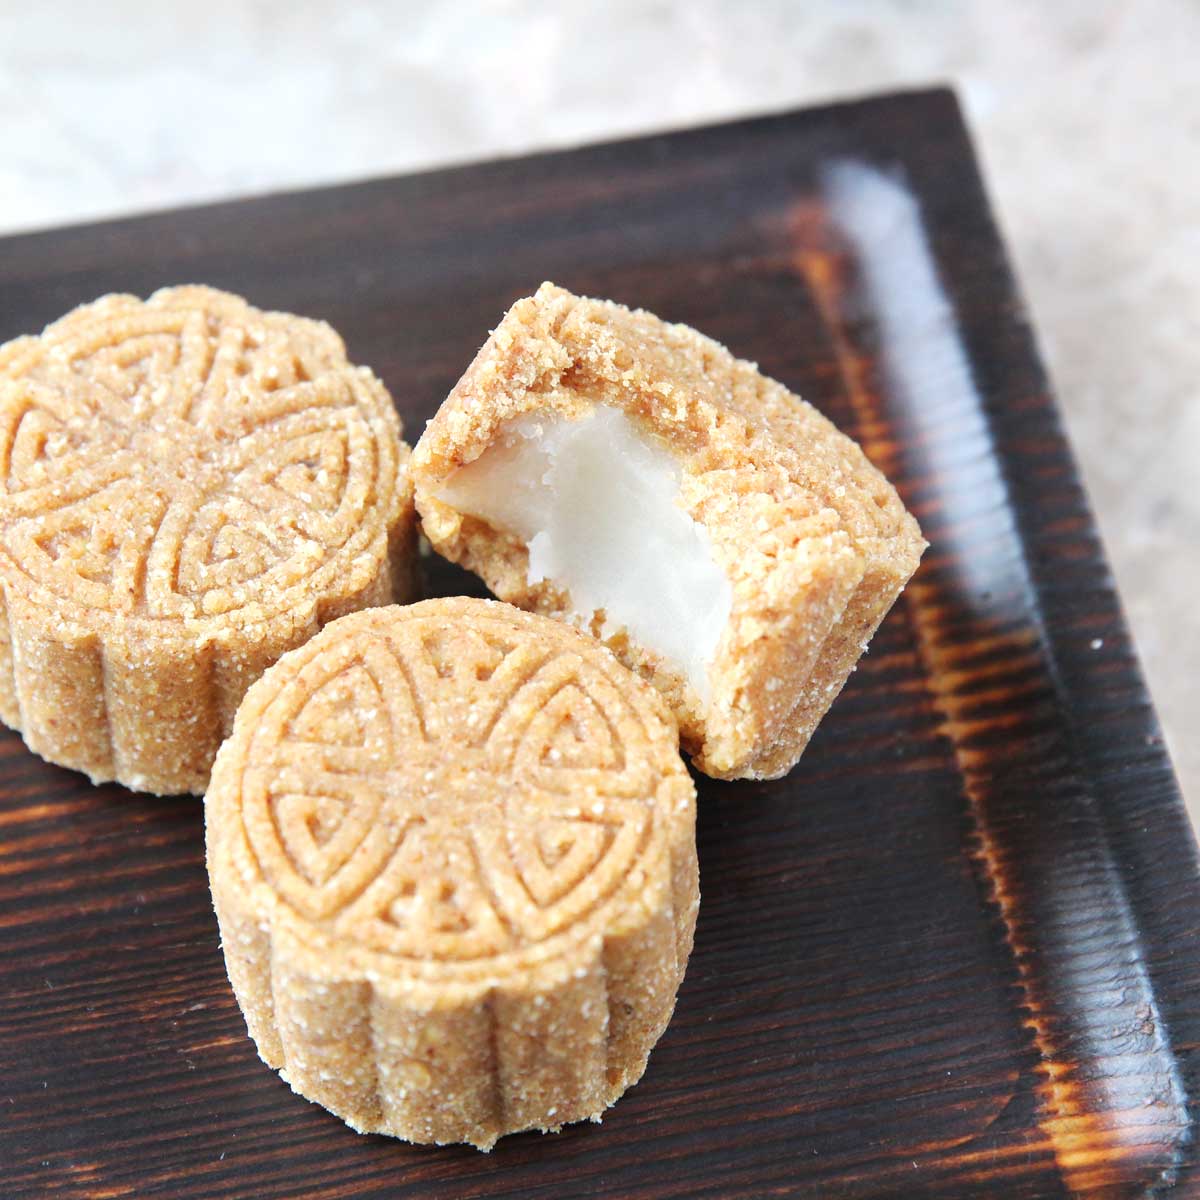 How to Make Chickpea Mooncakes (Vegan, Gluten-Free, High in Protein) - Walnut Butter Mooncakes